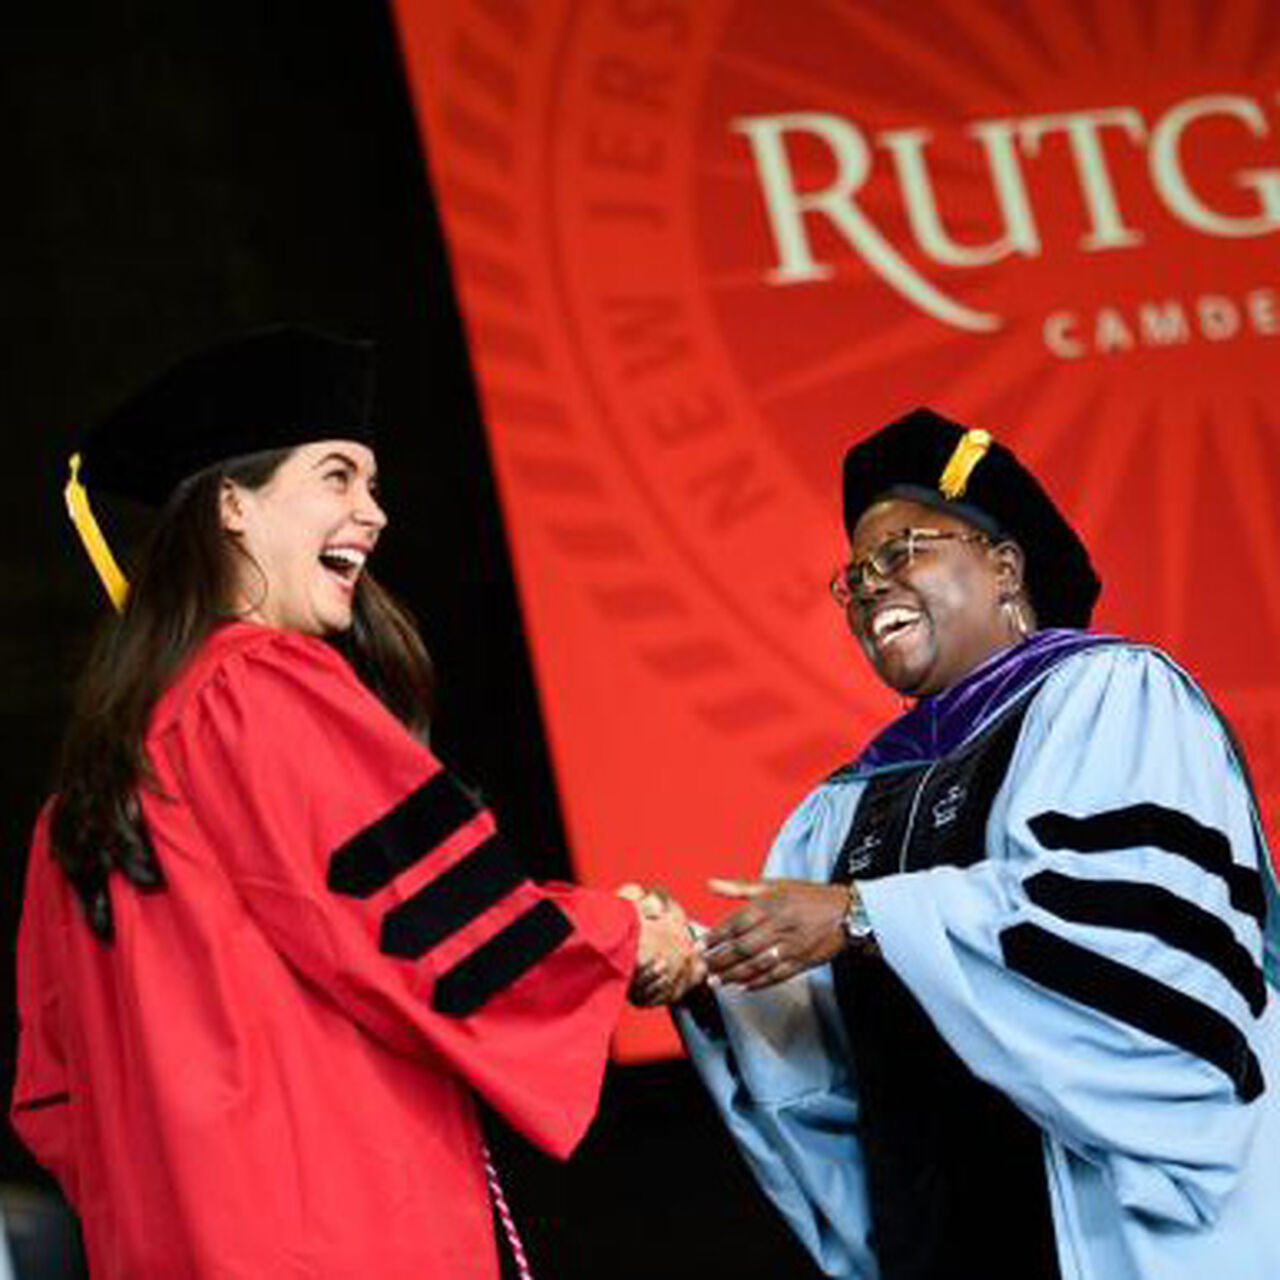 Rutgers professor giving degree to student at graduation image number 0